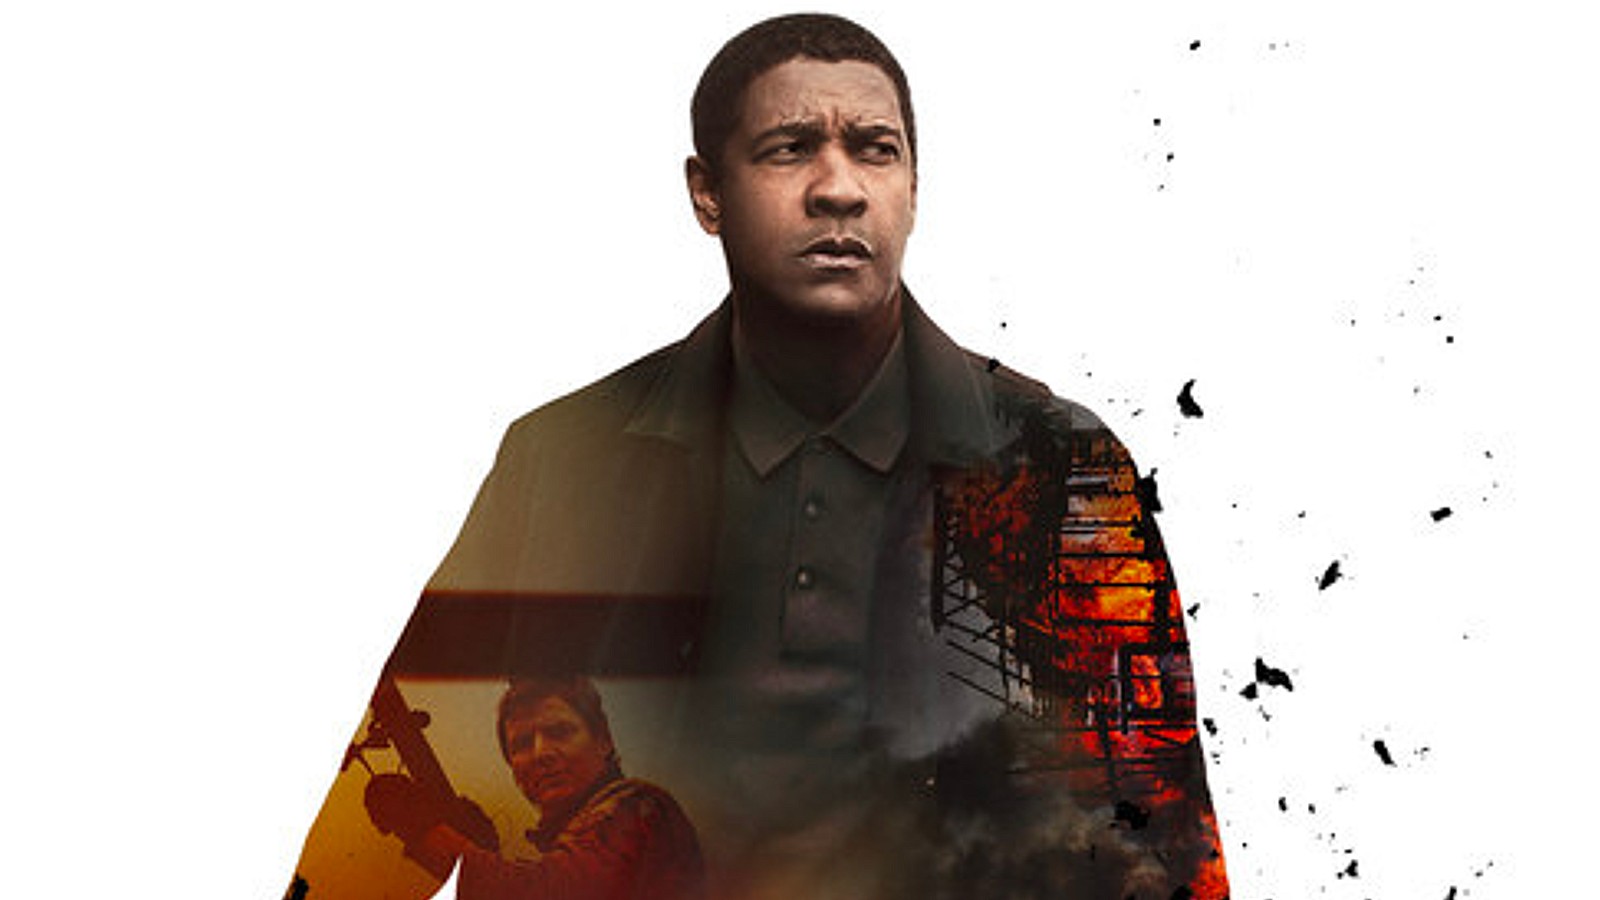 The Equalizer 4: Everything we know - Dexerto